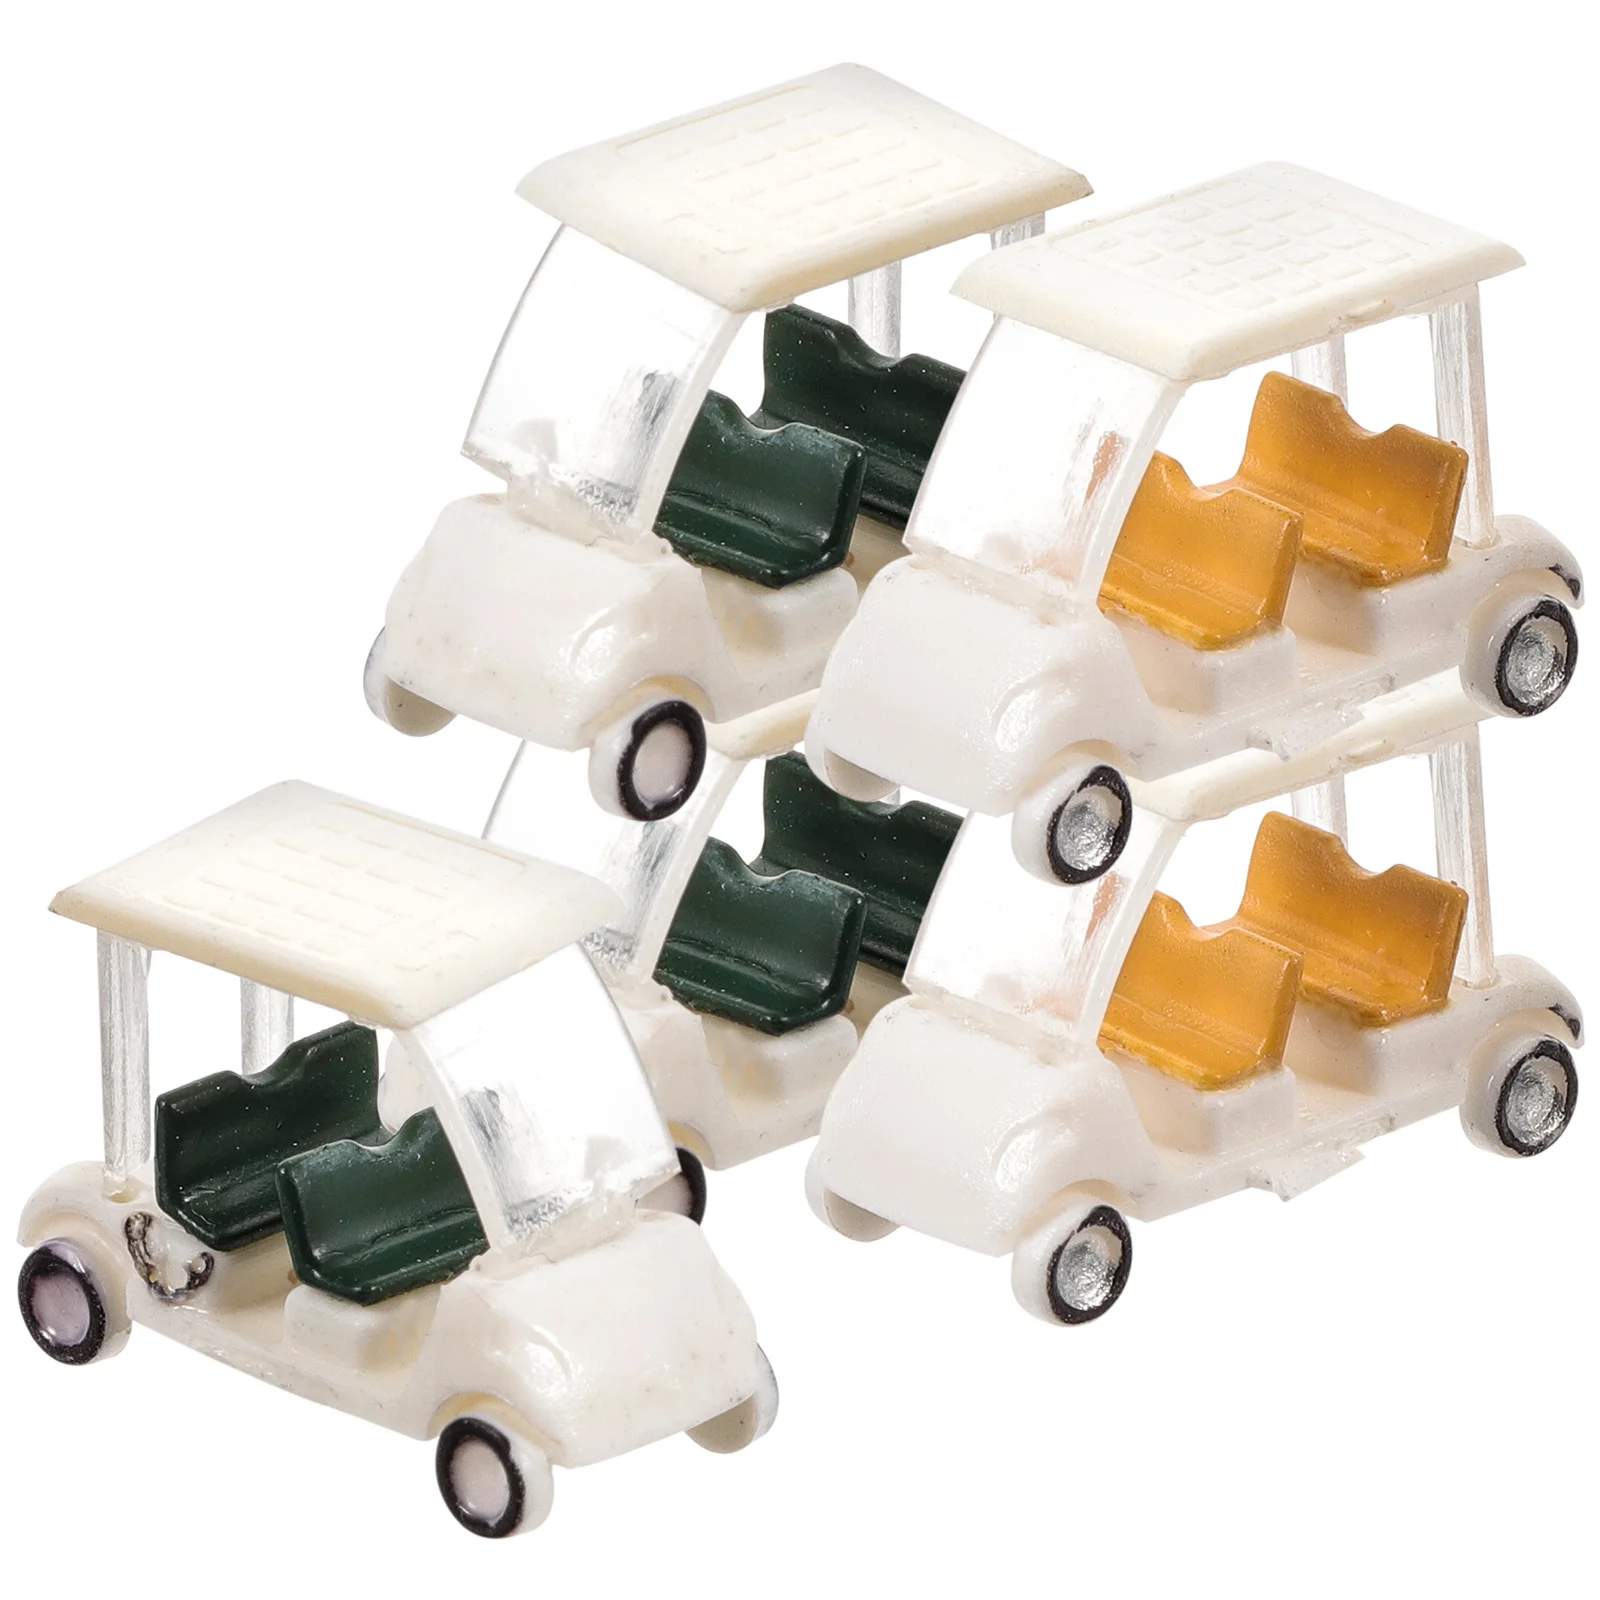 

5 Pcs Miniatures Small Golf Cart Decor Statue Model Figurines Resin Models Sand Table Golfs Prop Child Outdoor Toys